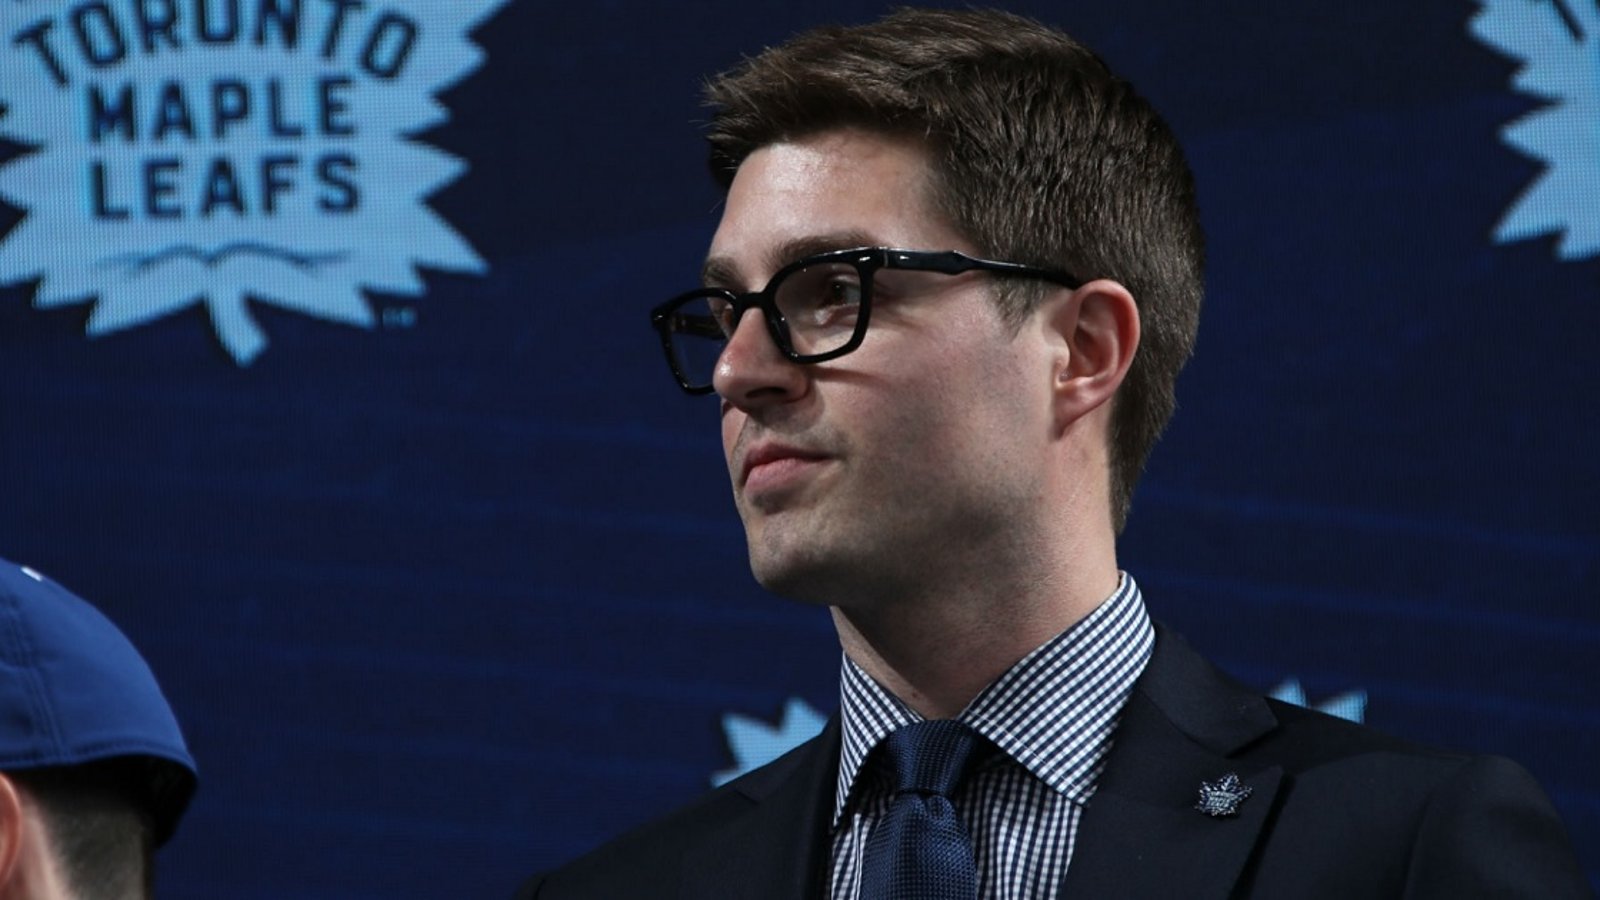 Rumor: Kyle Dubas was recruiting 2 former NHL players during his visit to Russia.